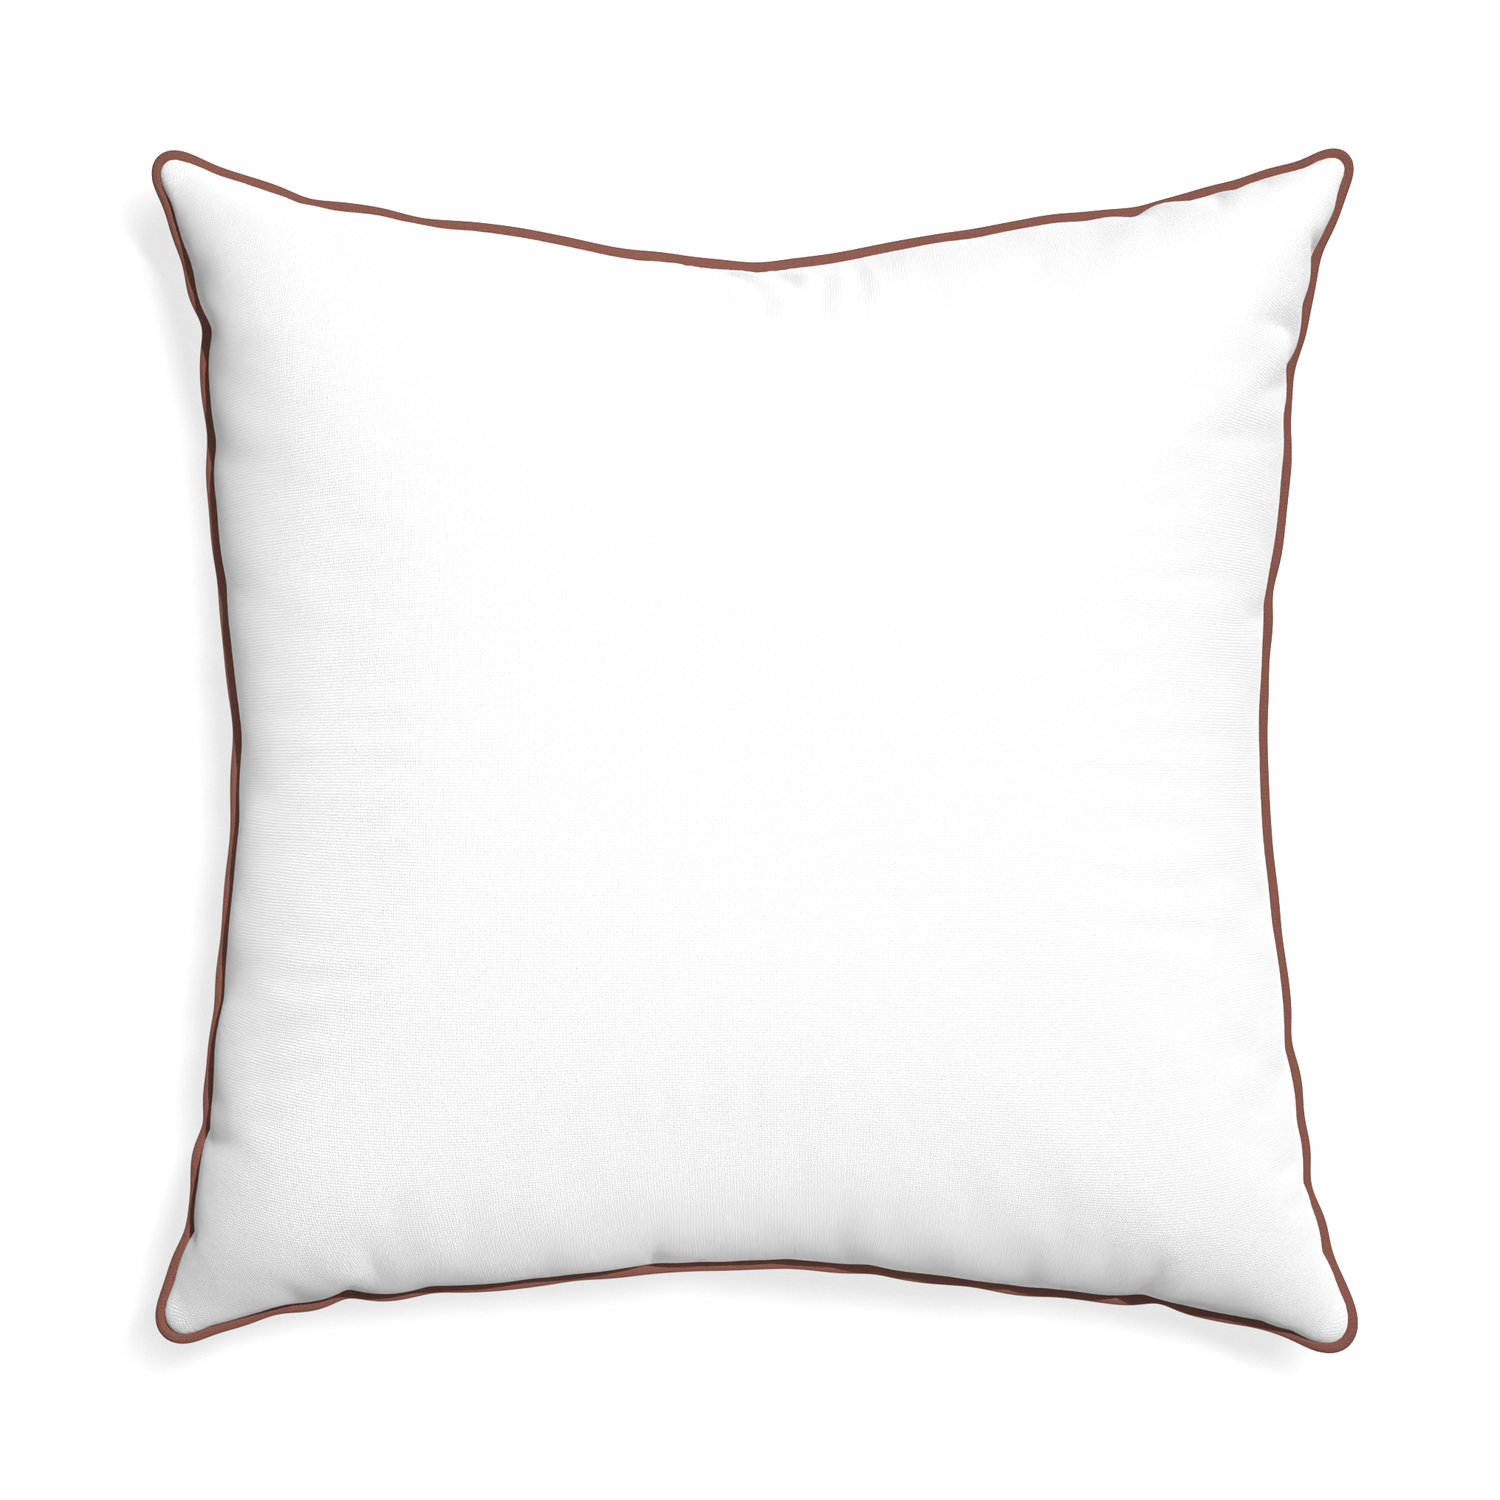 Euro-sham snow custom pillow with w piping on white background